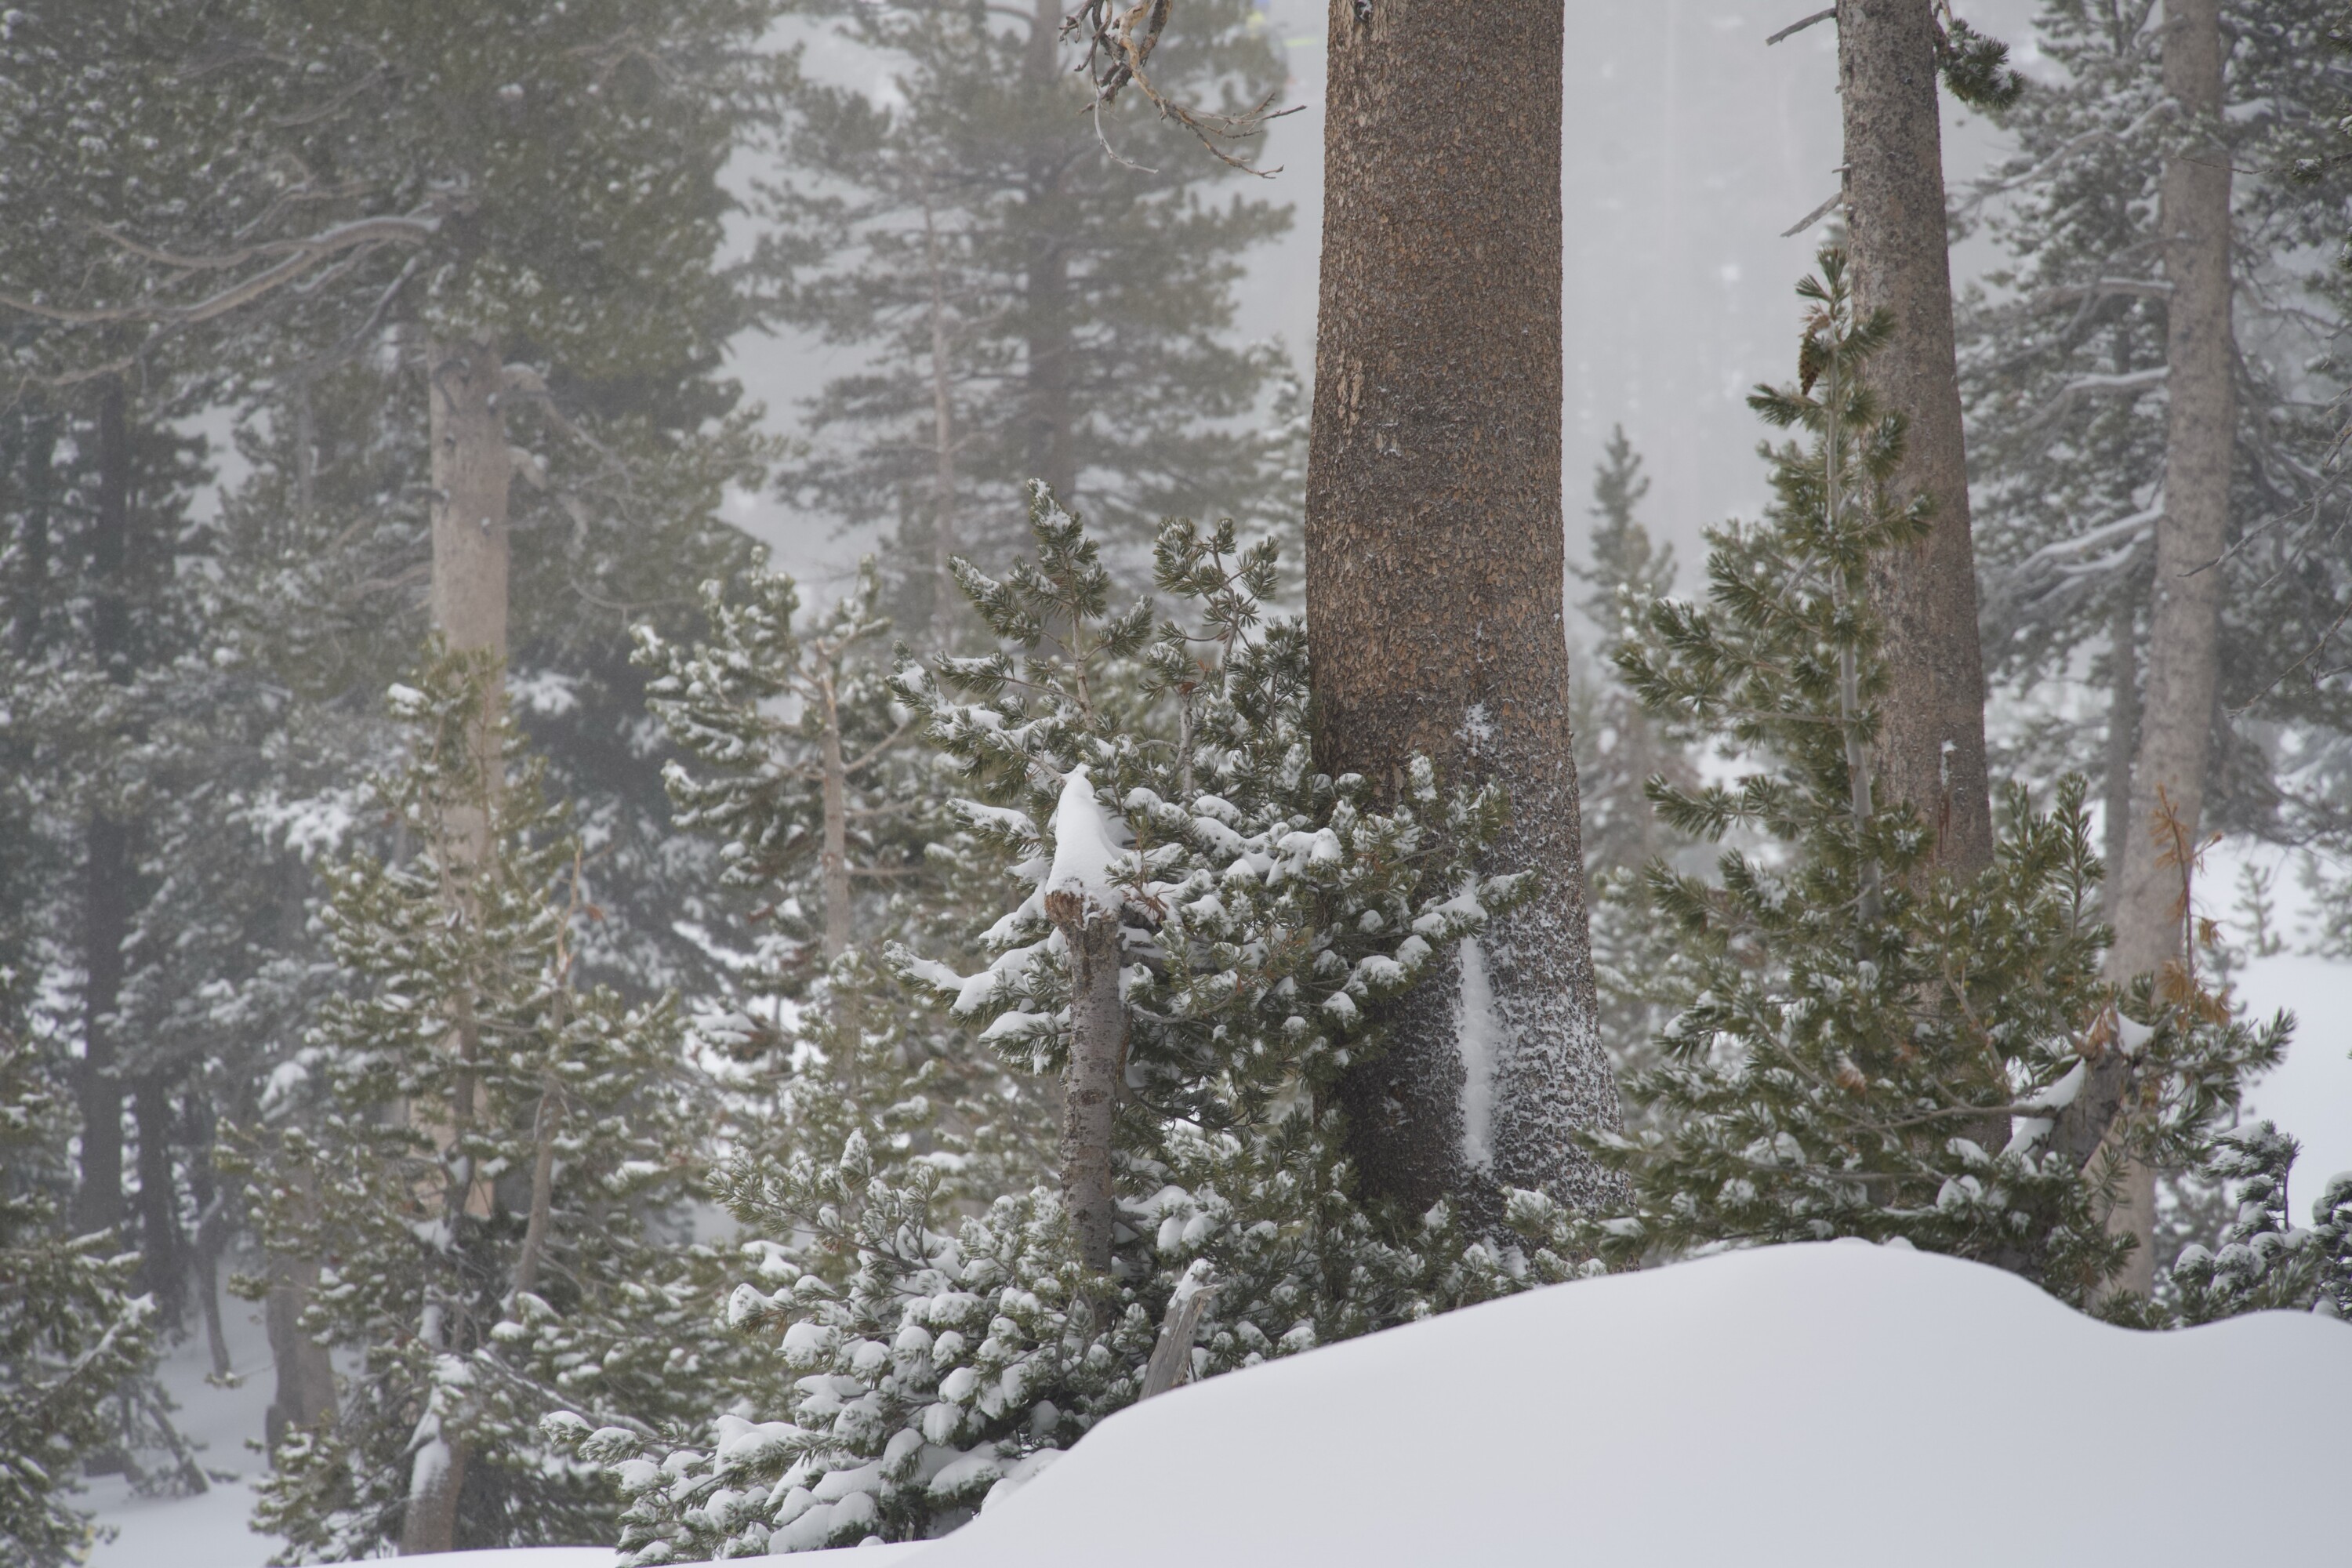 Snowy forest landscape at Mammoth Lakes, California.